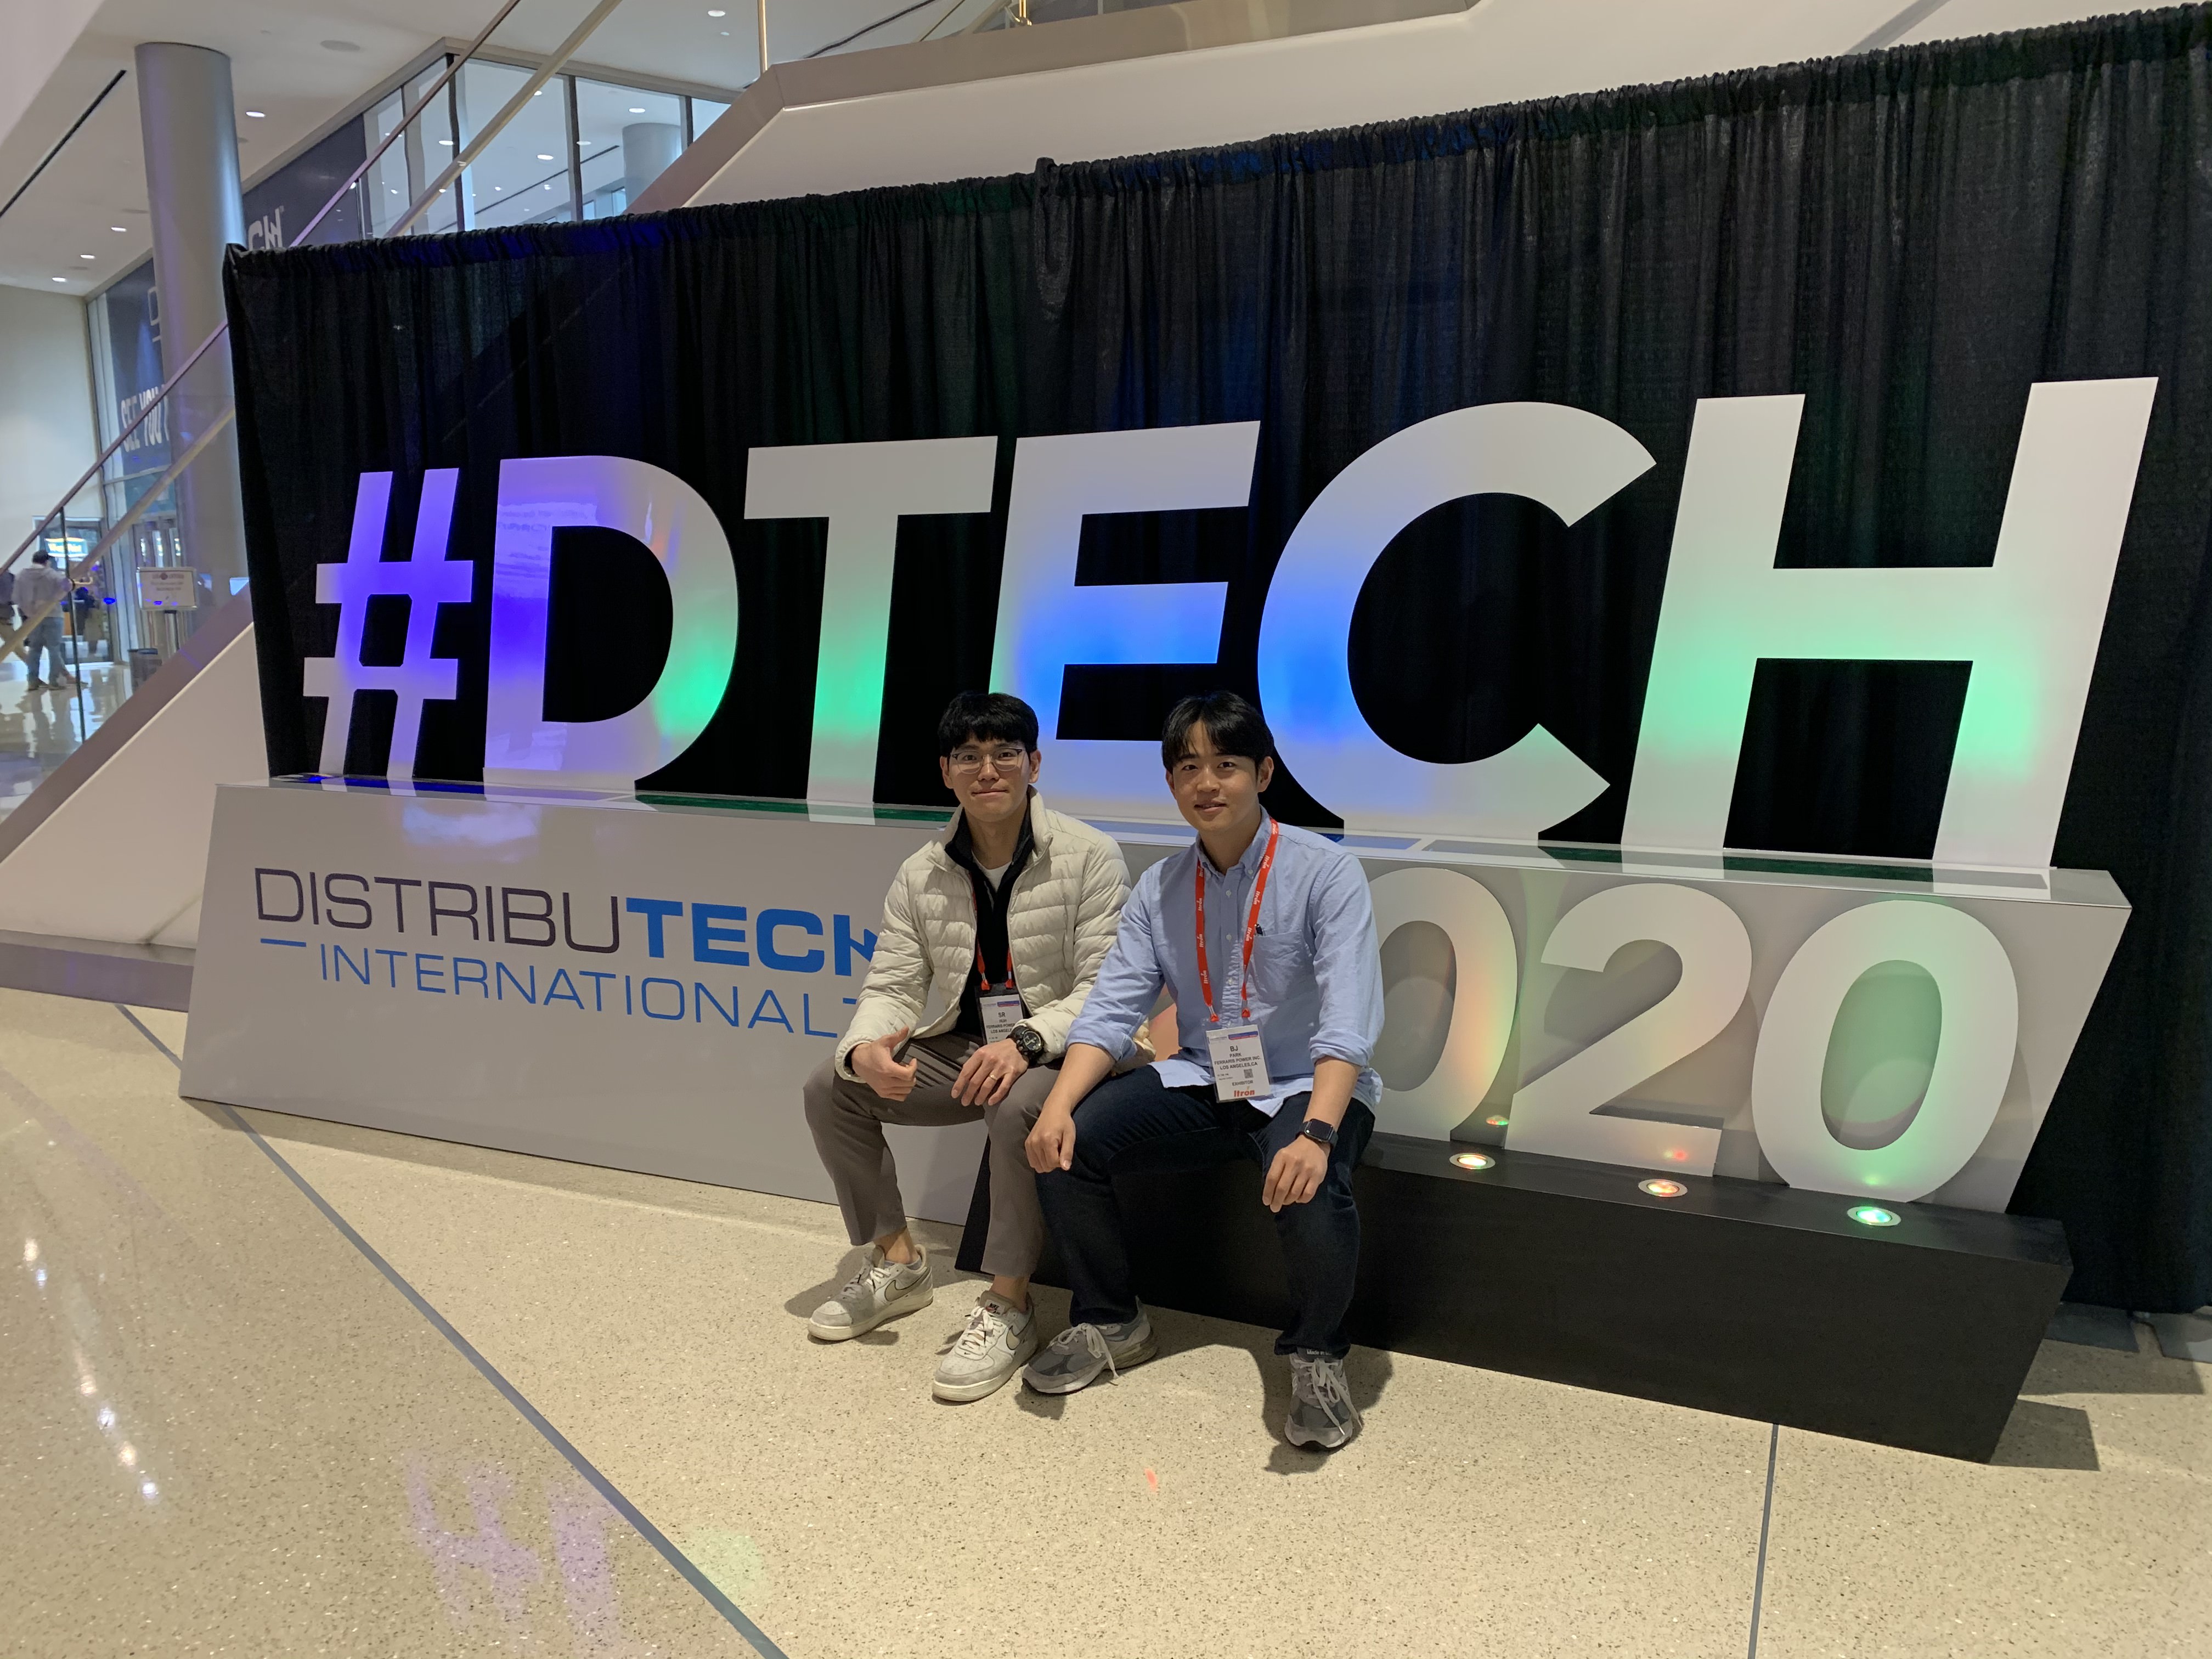 2020 DistribuTech Conference & Exhibition1.jpg